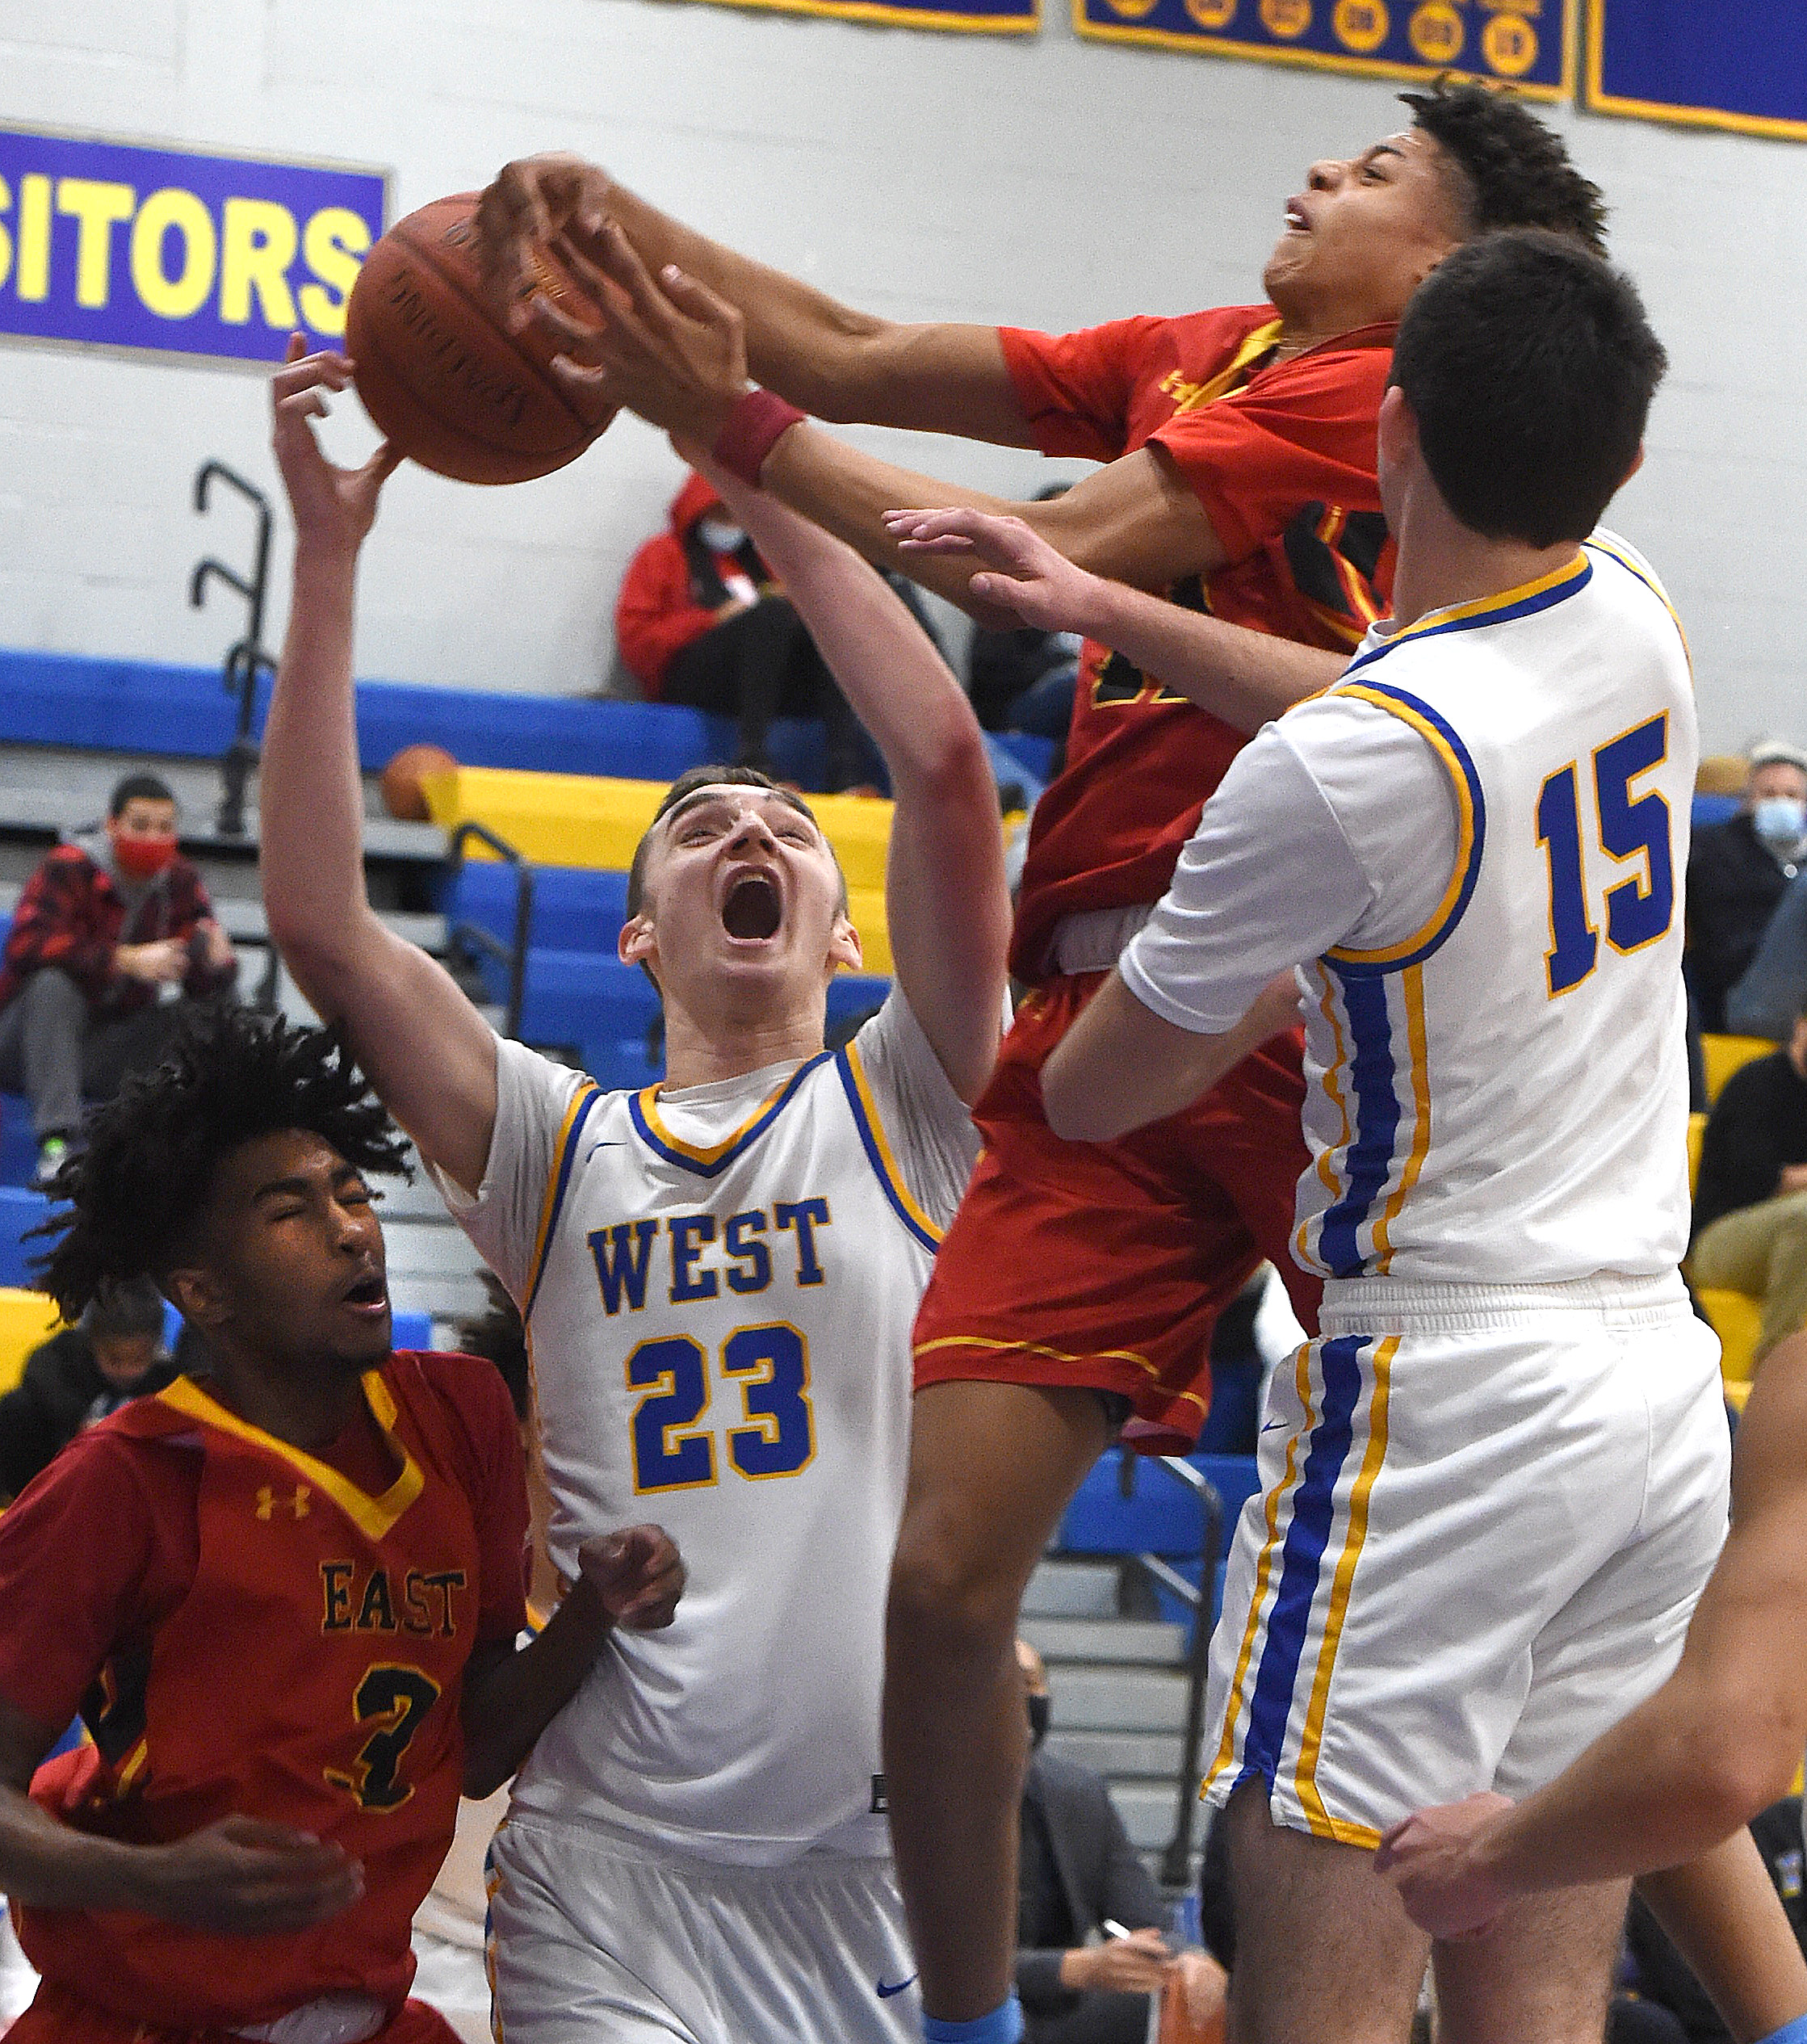 Downingtown West survives late Haverford rally